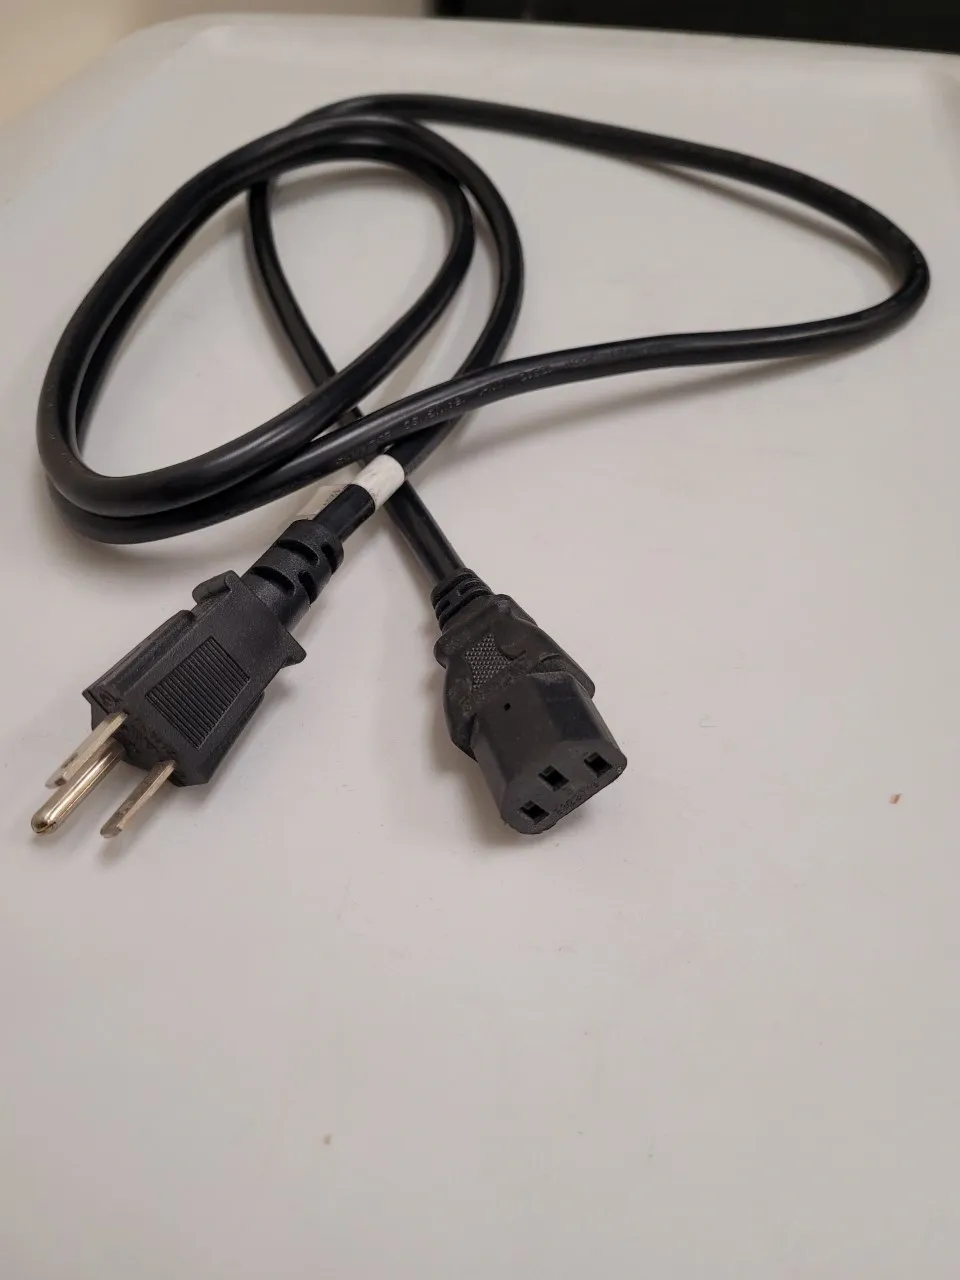 A black cord with two plugs on top of it.